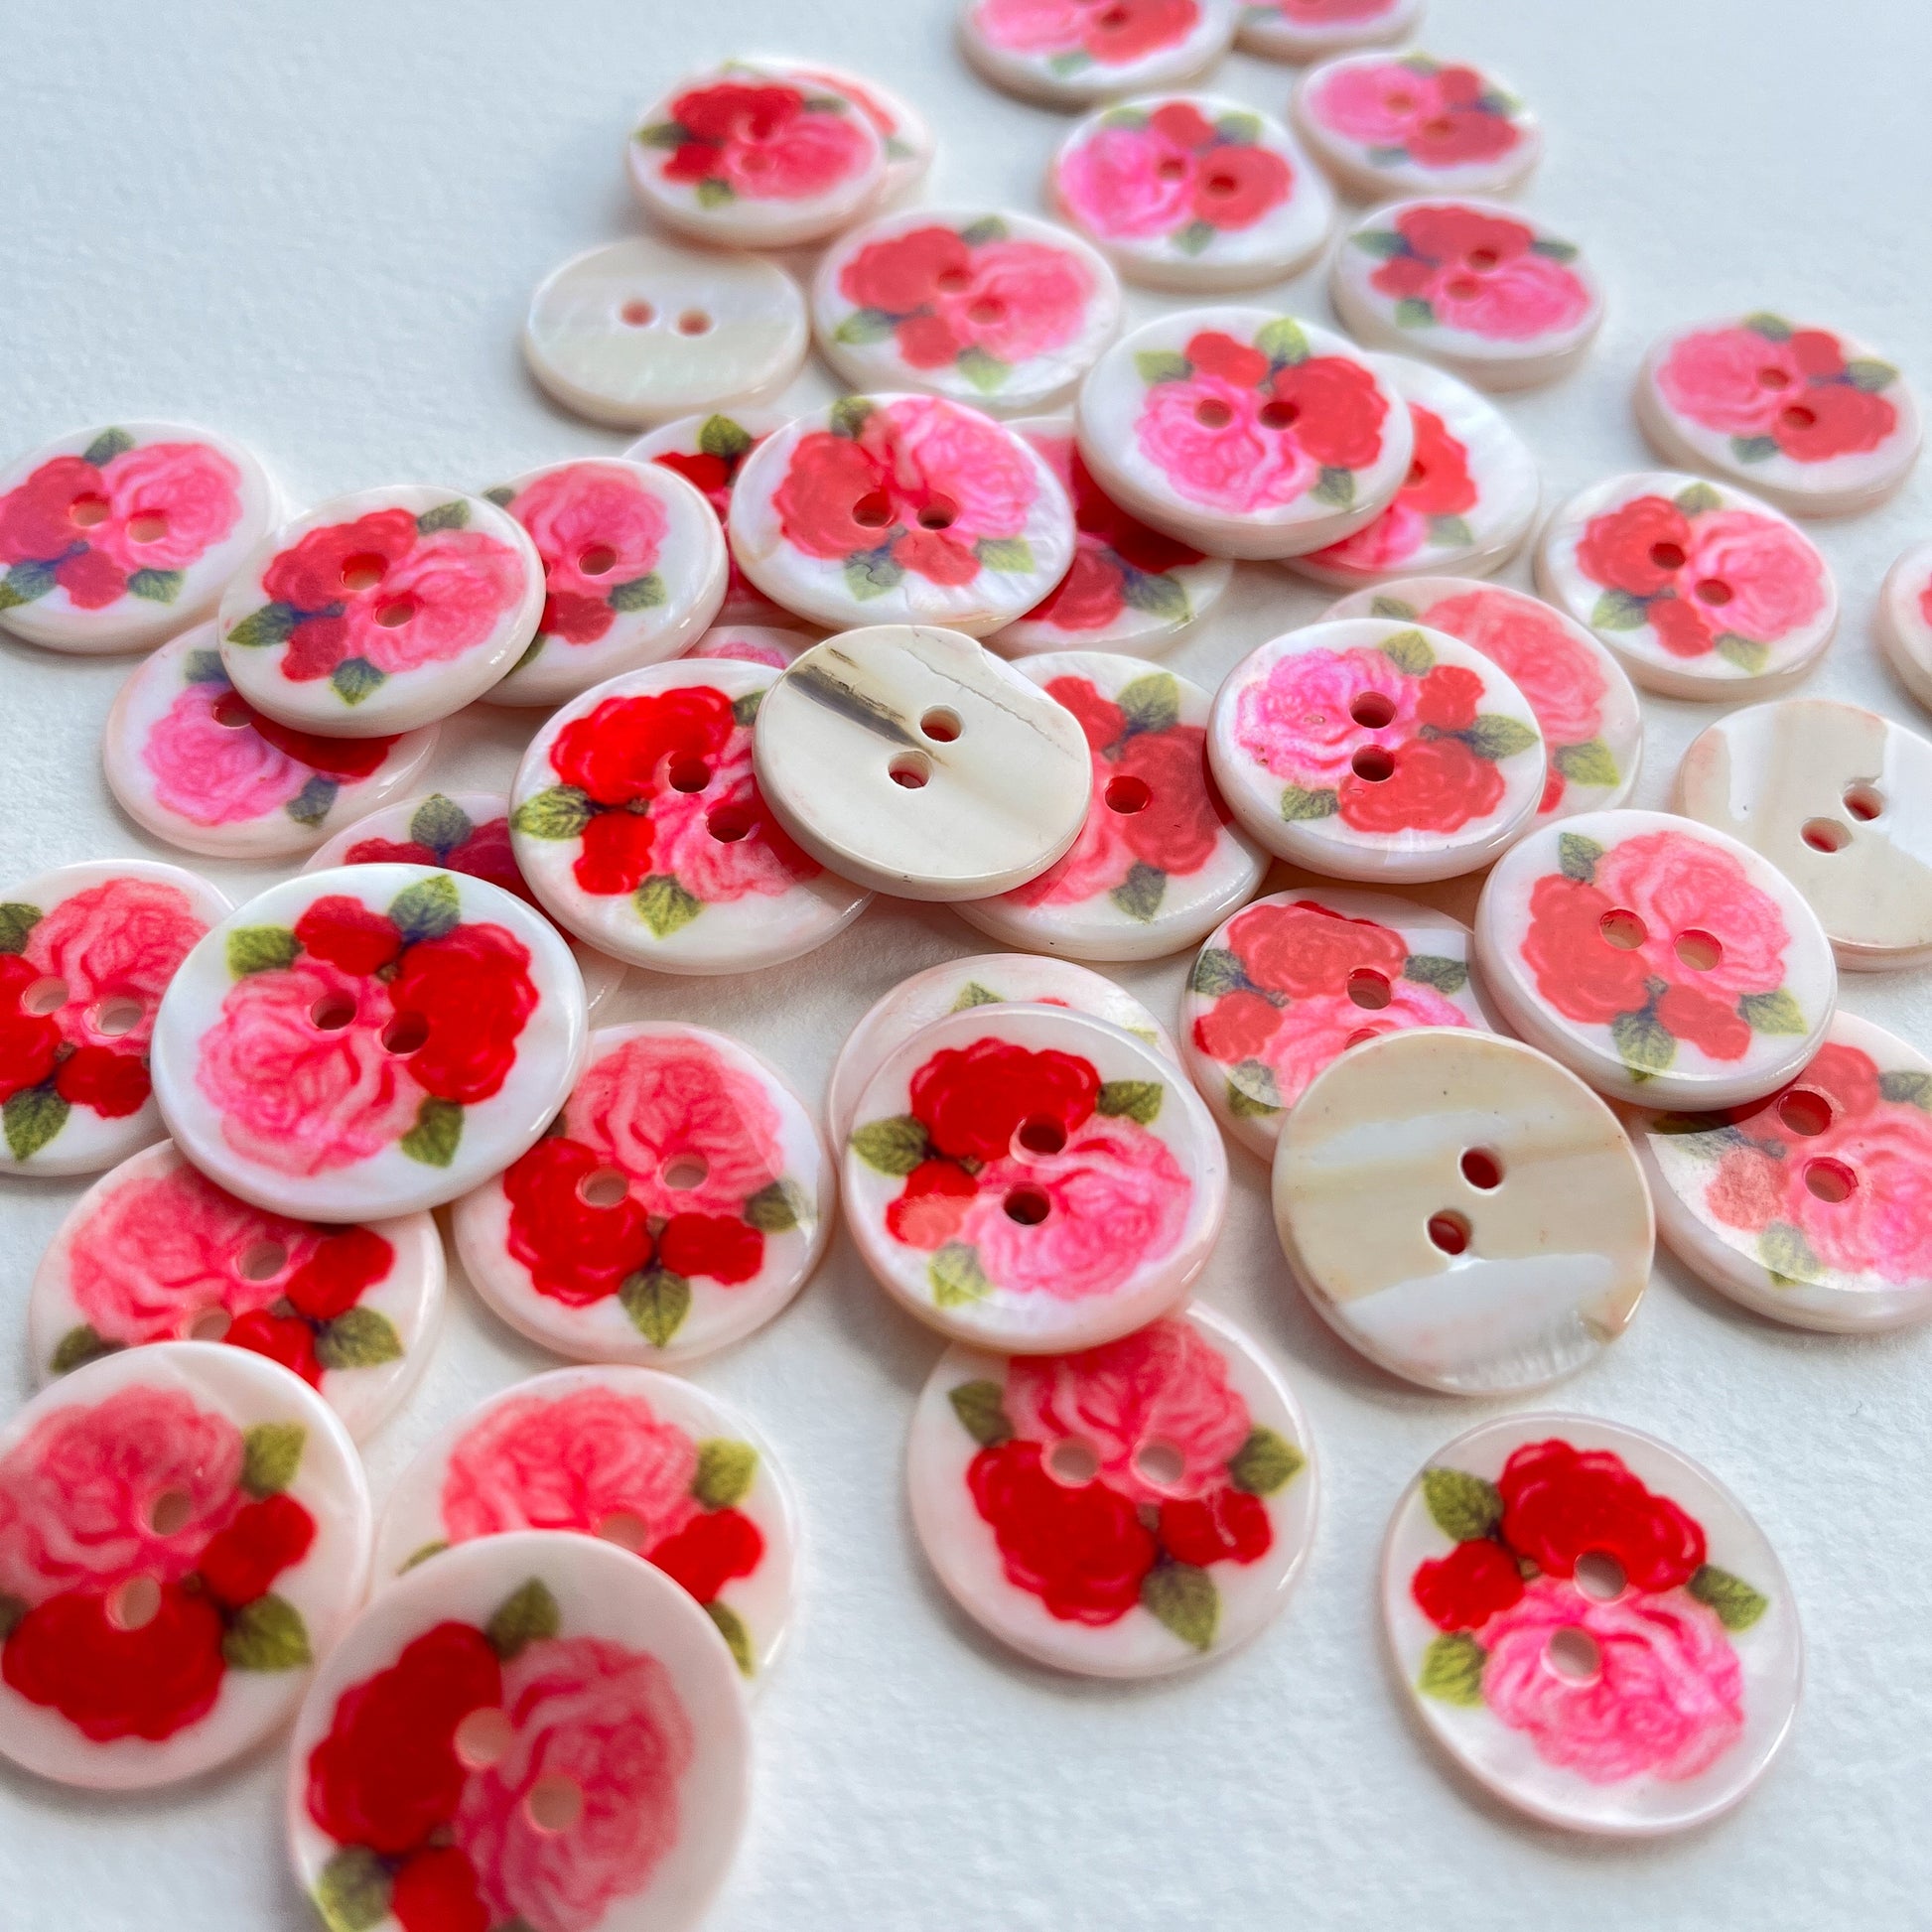 pretty lacquered Agoya shell buttons with flower design in red and pink. Deadstock haberdashery. Choose our range of vintage buttons, trims & sewing accoutrement rescued from a London haberdasher. Sew sustainably.